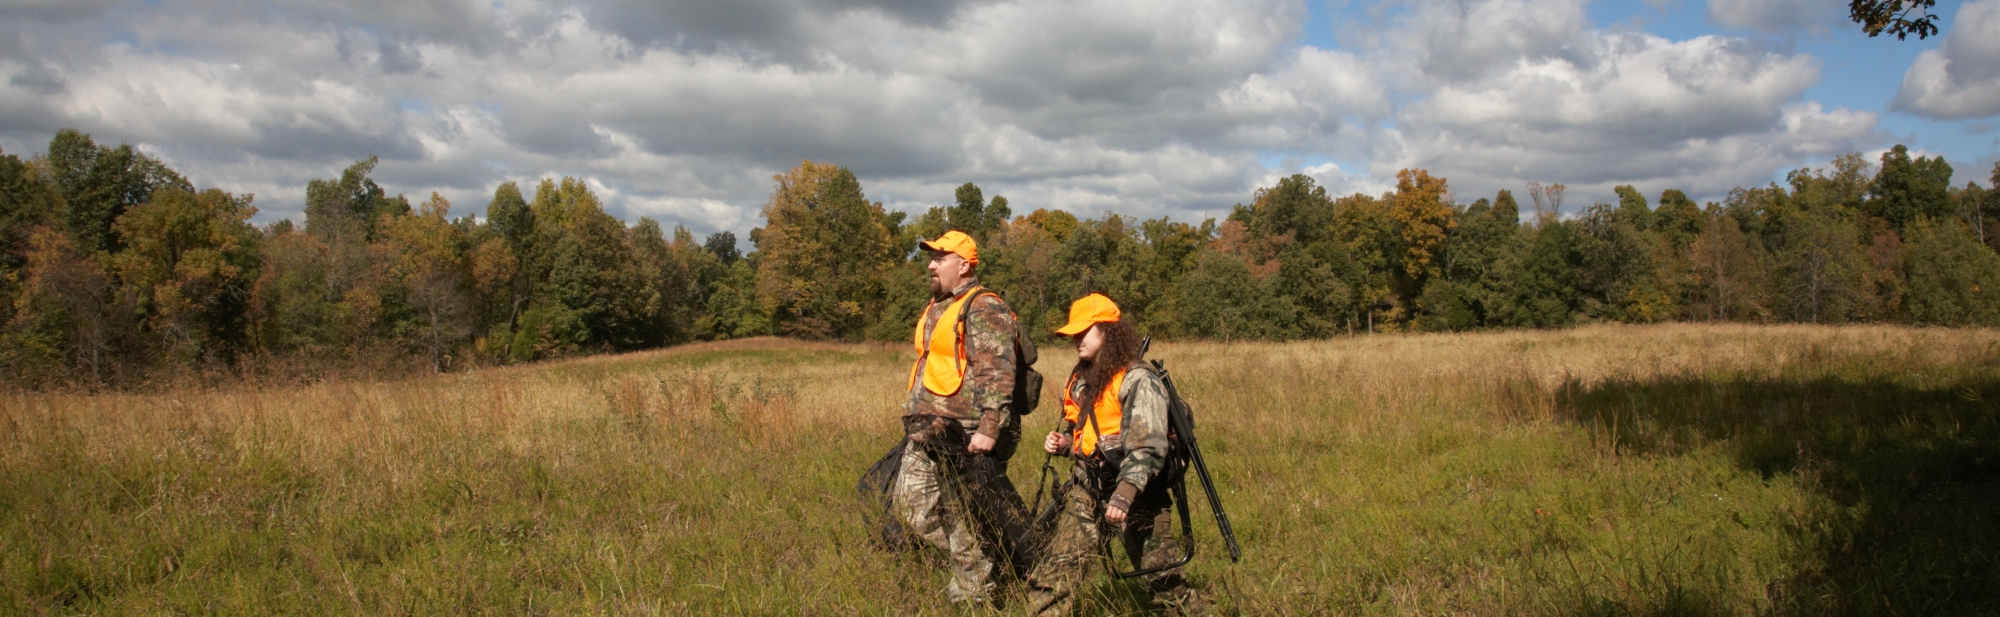 Two hunters walking in a grassy field surrounded by trees.